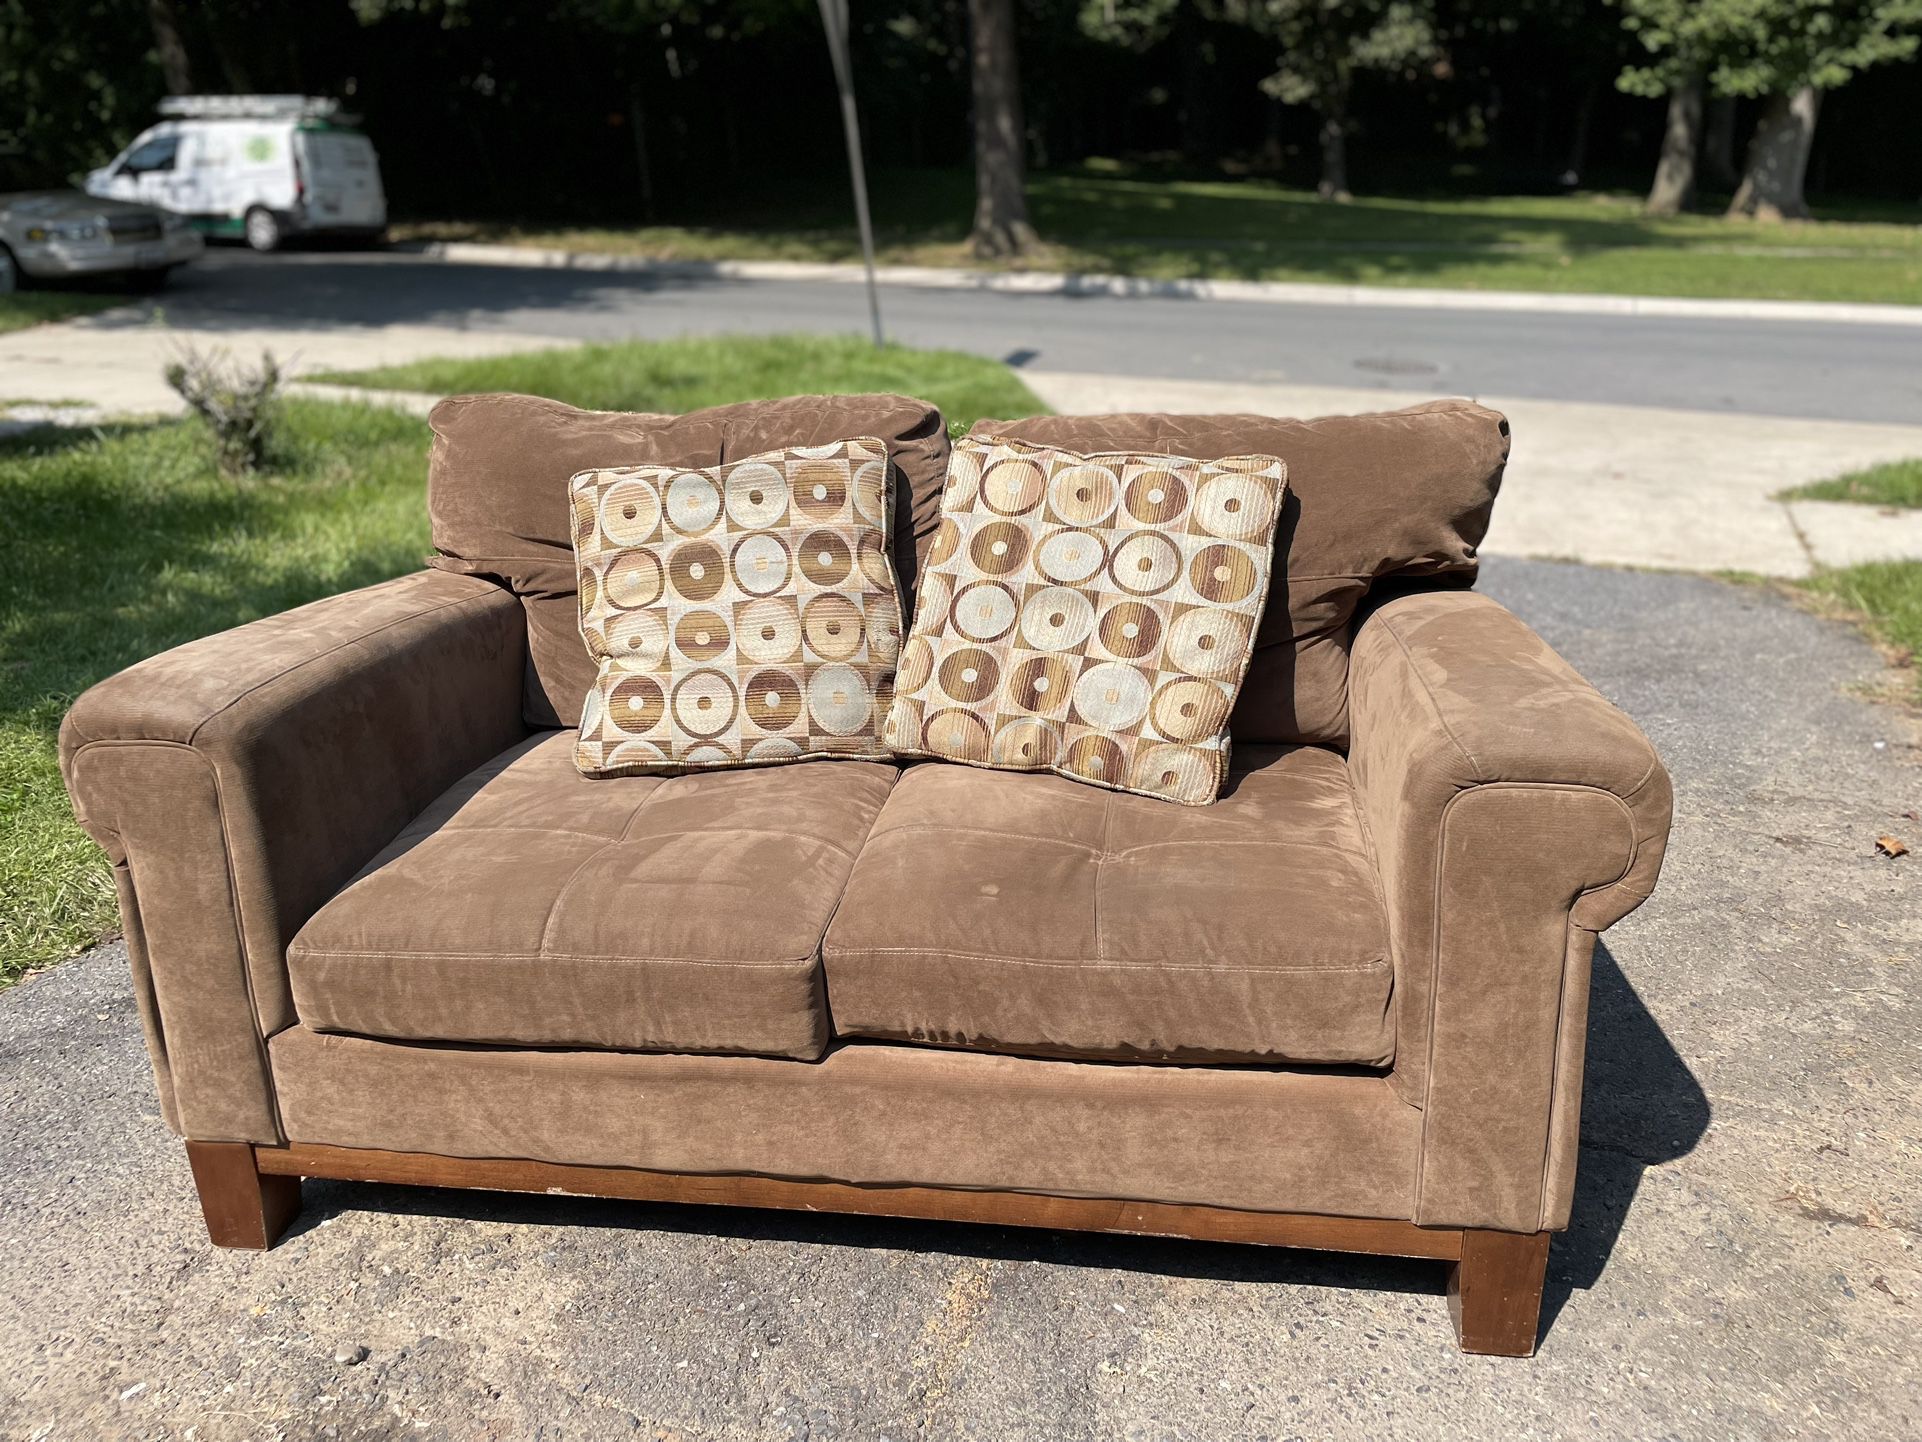 FREE DELIVERY- Brown Sofa - price negotiable  